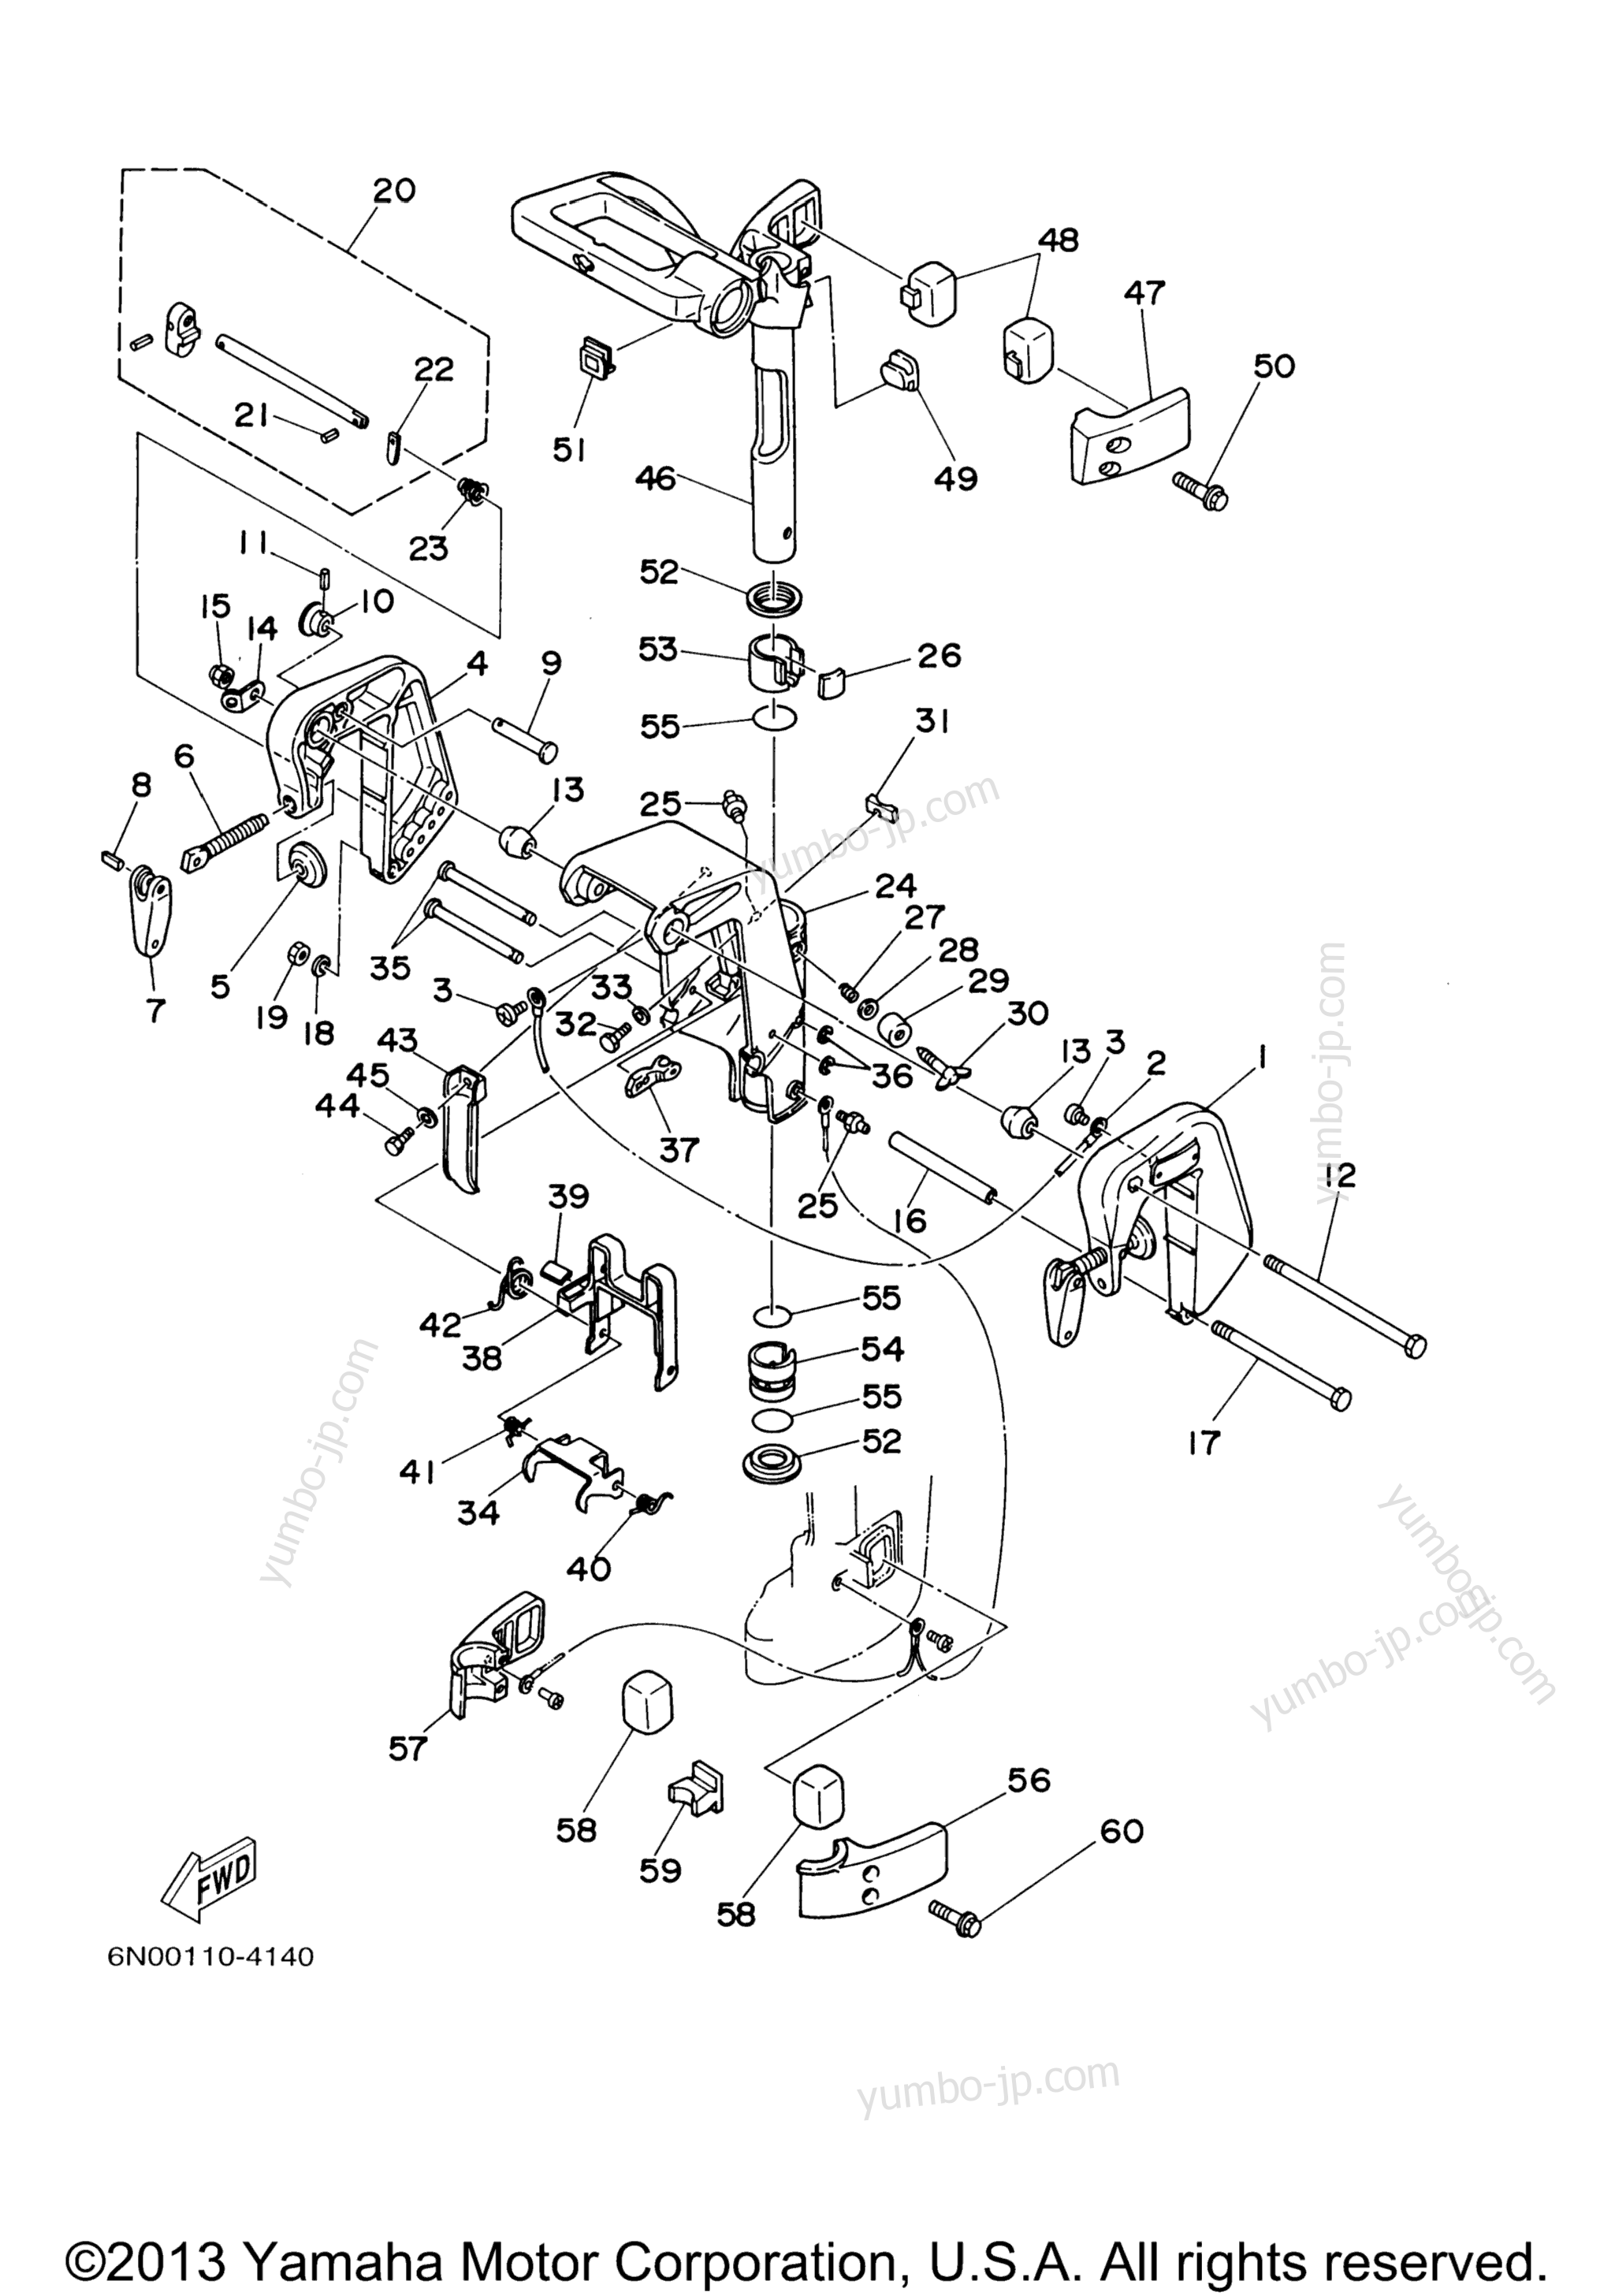 Bracket for outboards YAMAHA 8MSHB 2003 year